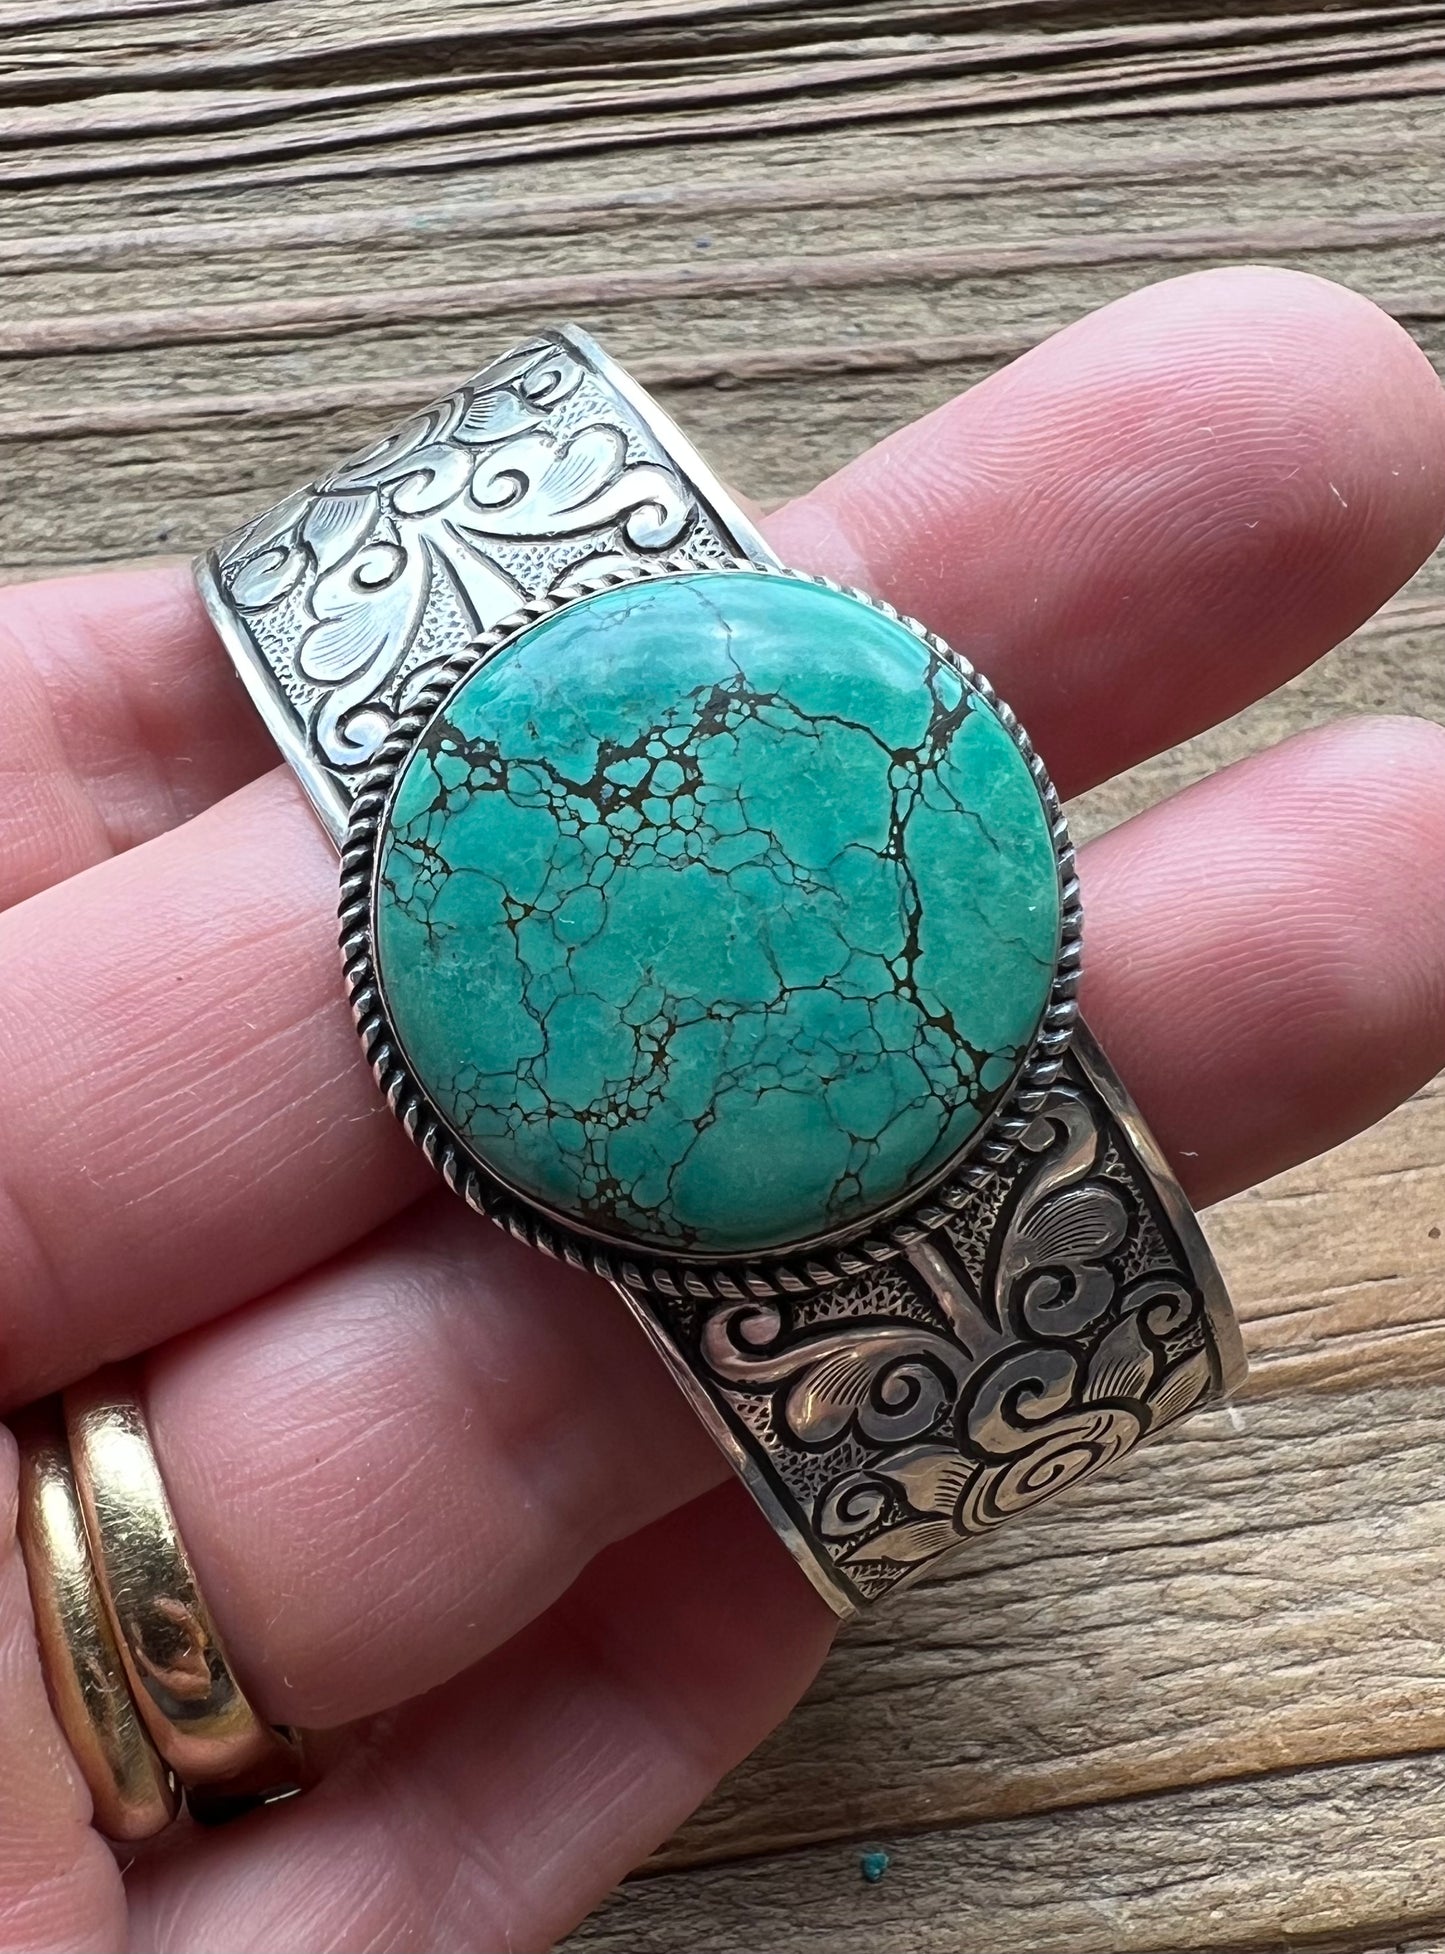 Turquoise and Sterling Silver Cuff